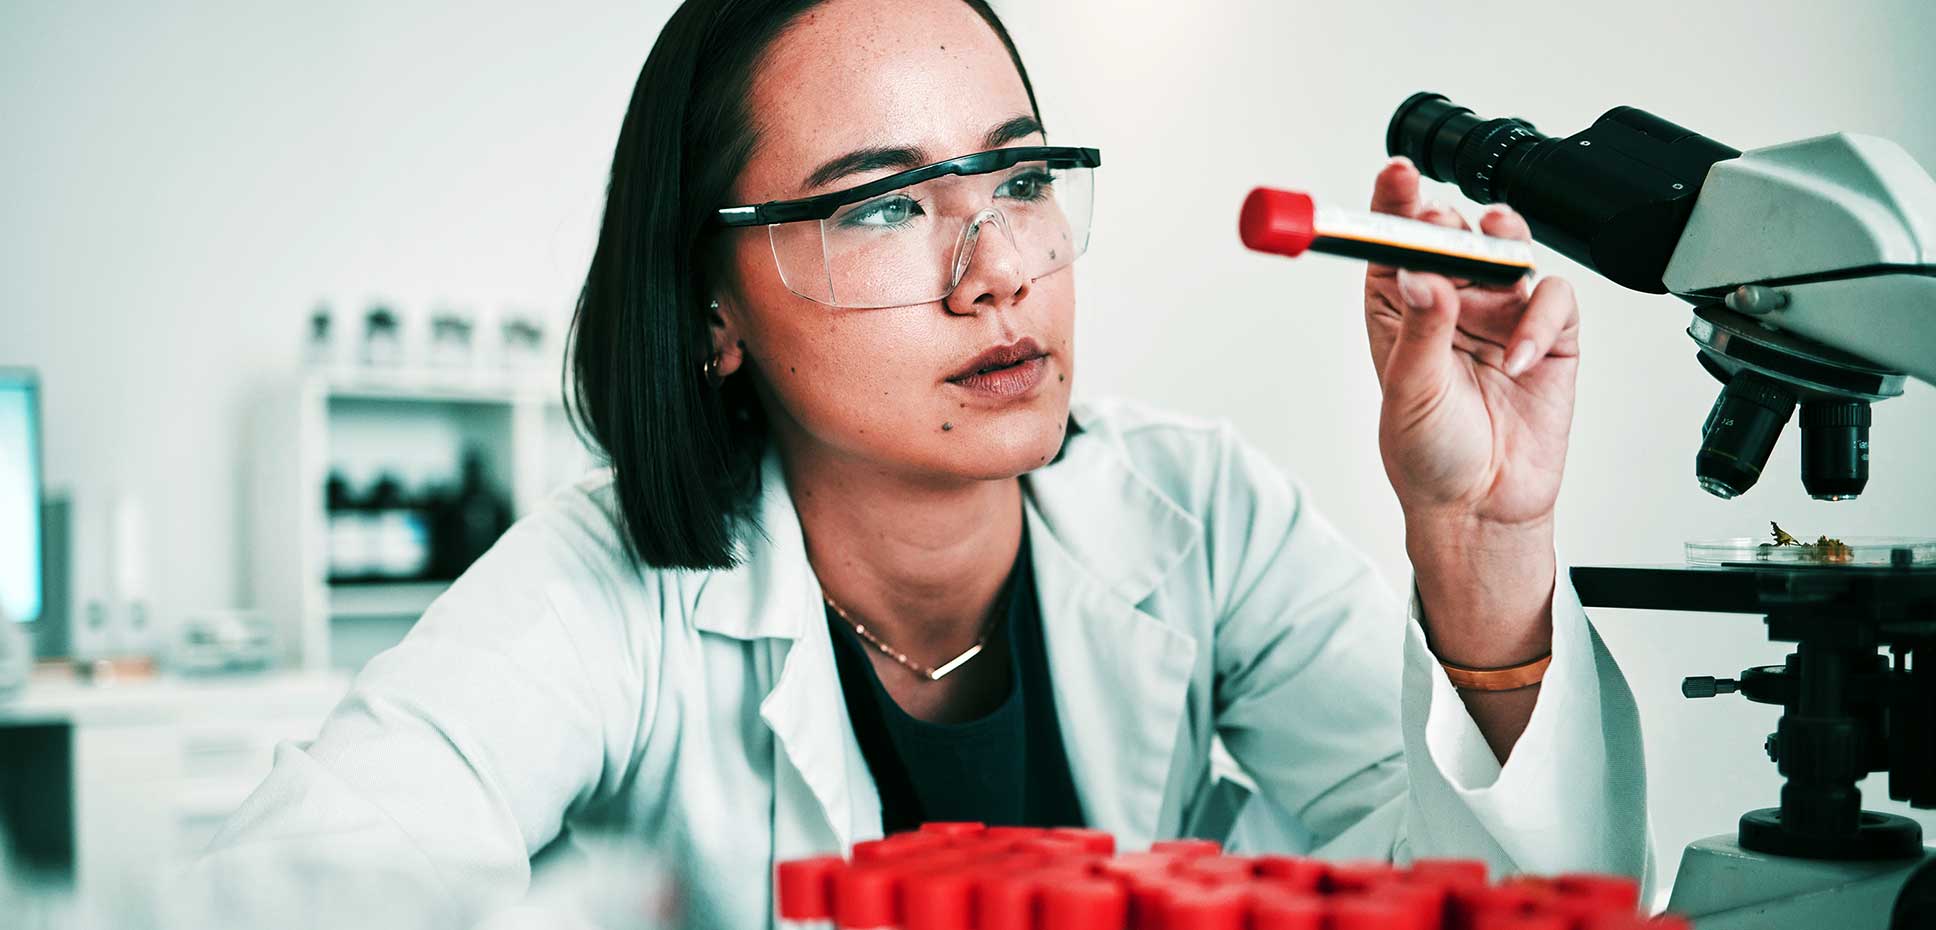 Woman in lab coat analyzing vial of blood